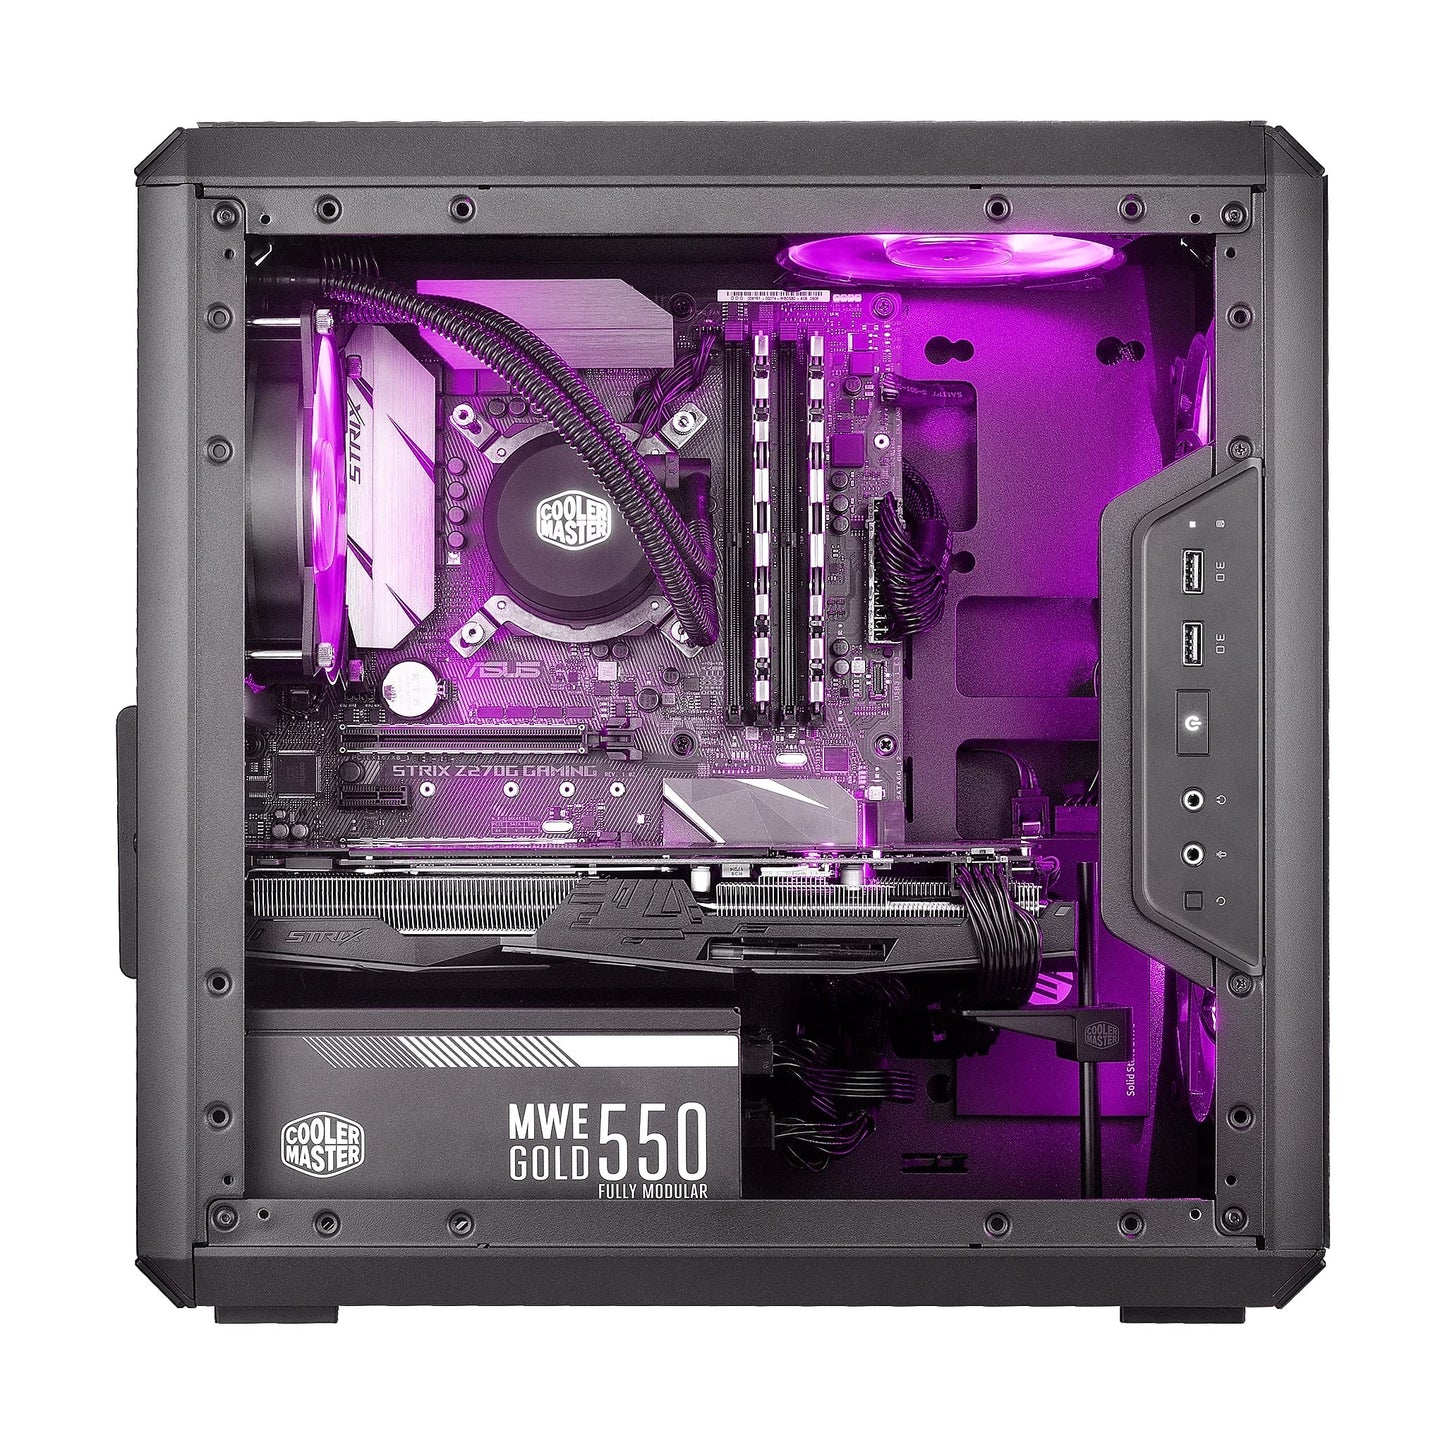 Cooler Master MasterBox Q300L Micro-ATX Tower with Magnetic Design Dust Filter, Transparent Acrylic Side Panel, Adjustable I/O & Fully Ventilated Airflow, Black (MCB-Q300L-KANN-S00)